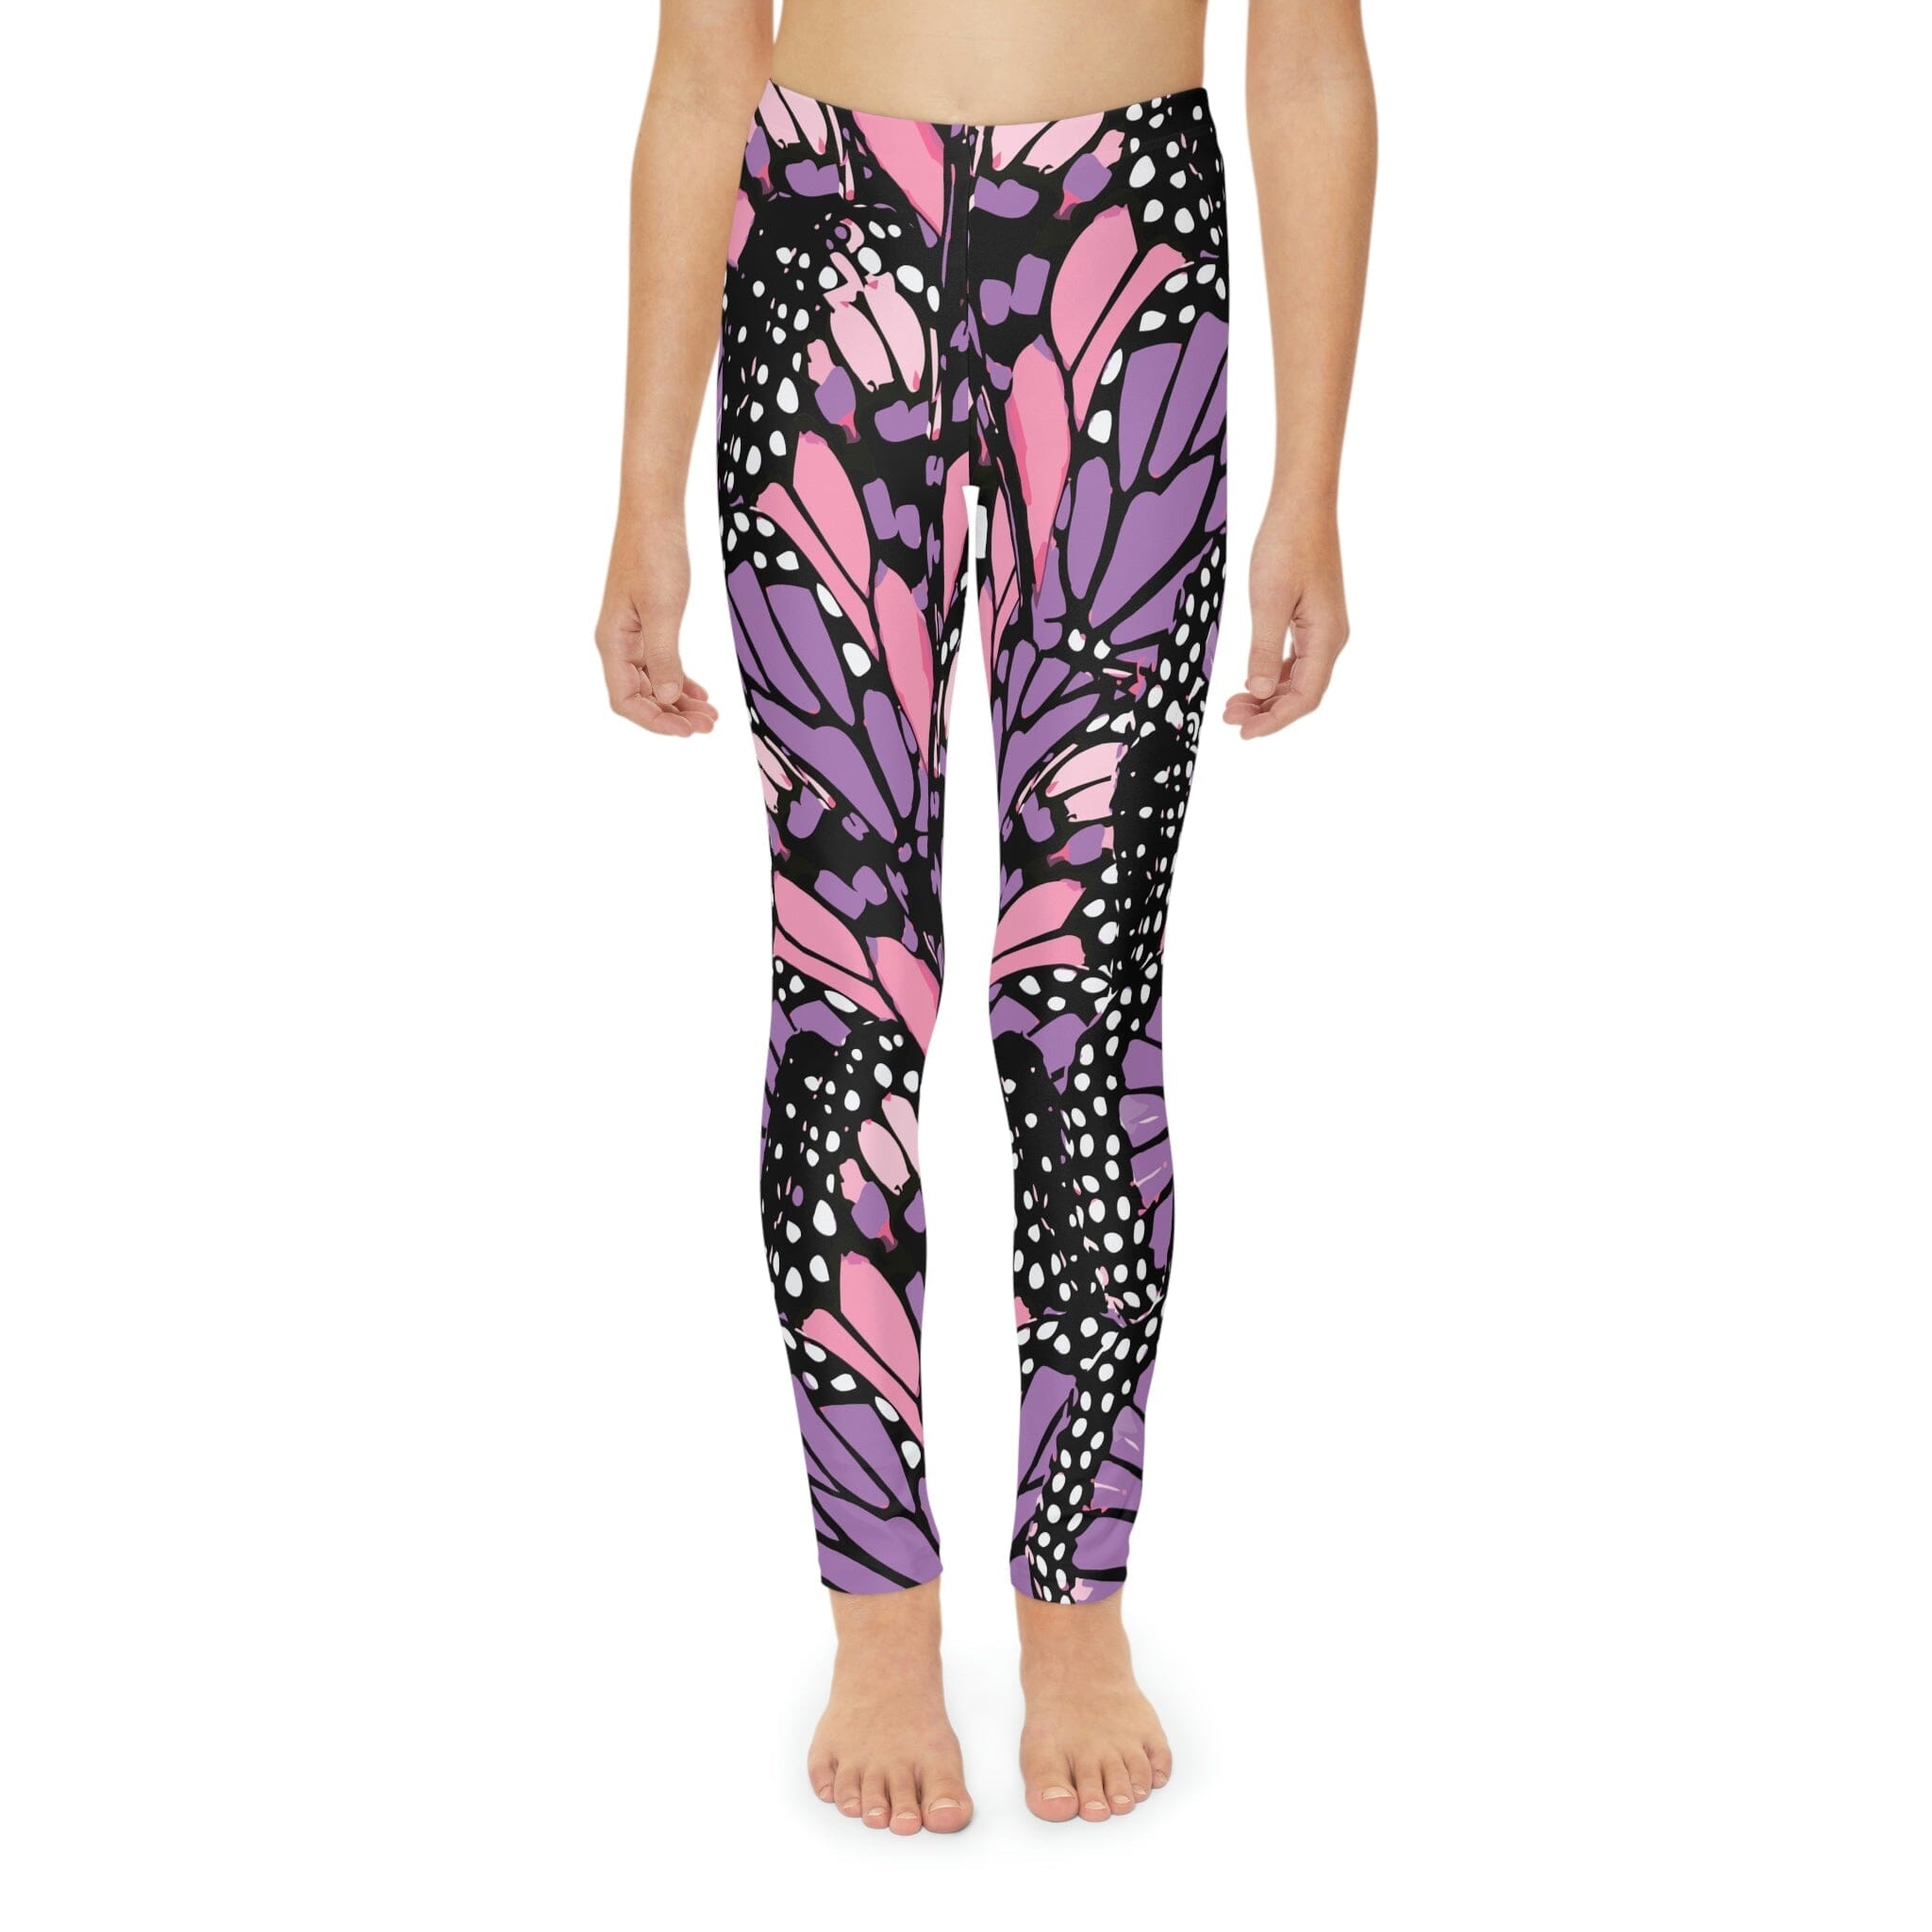 Butterfly Print Leggings - Photo color / 1-2Y